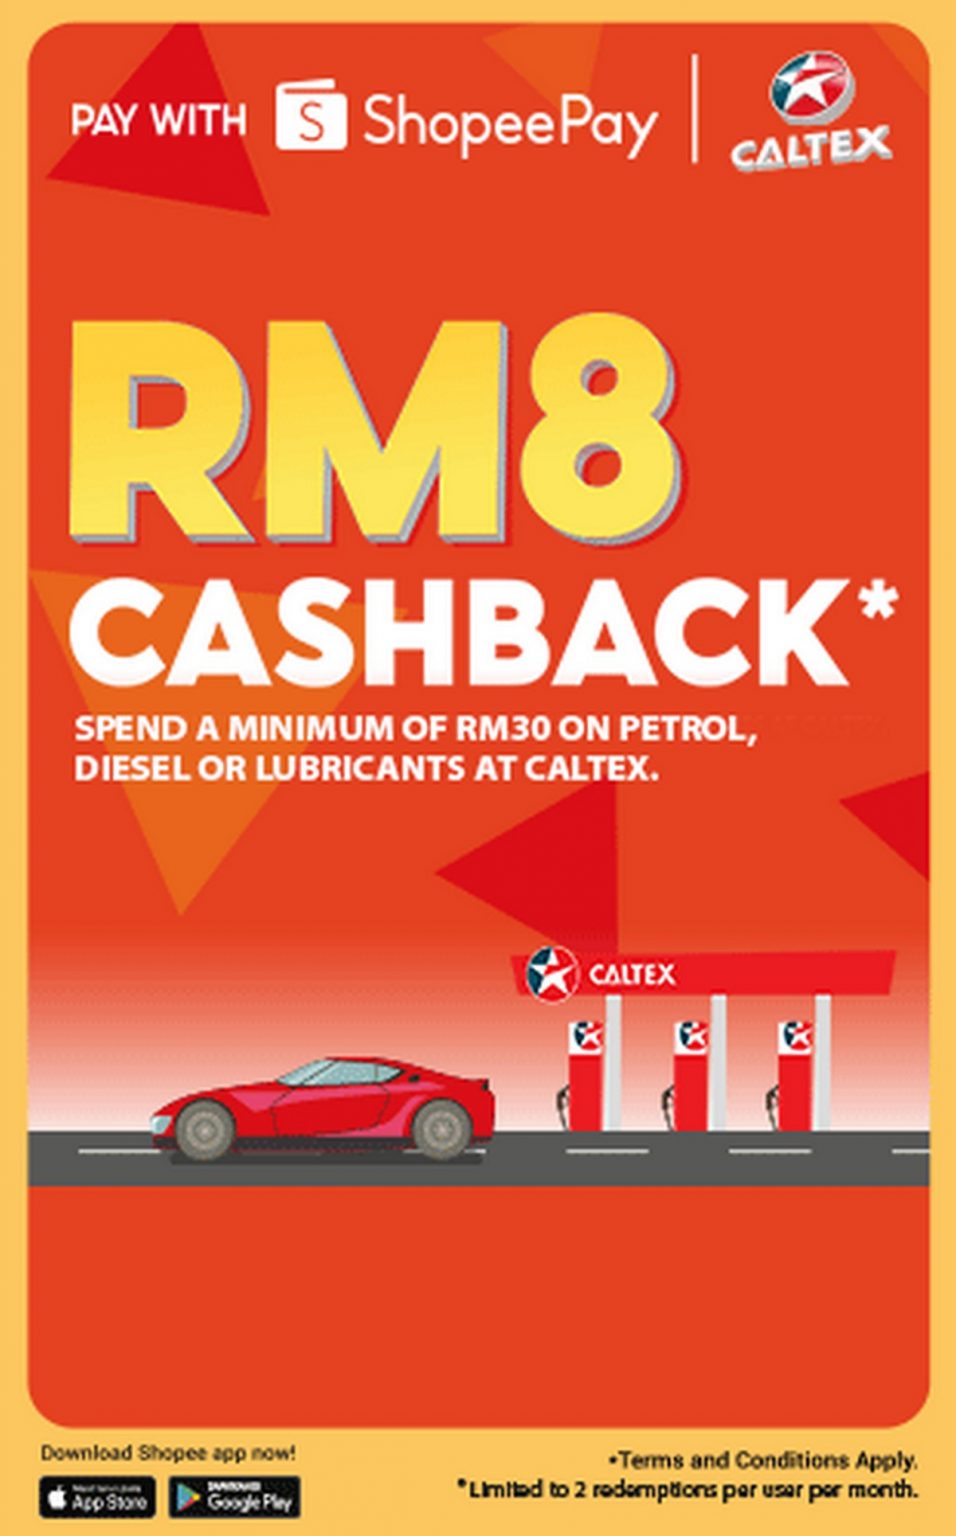 now-you-can-use-shopeepay-to-get-your-fuel-and-get-rm16-cash-rebate-too